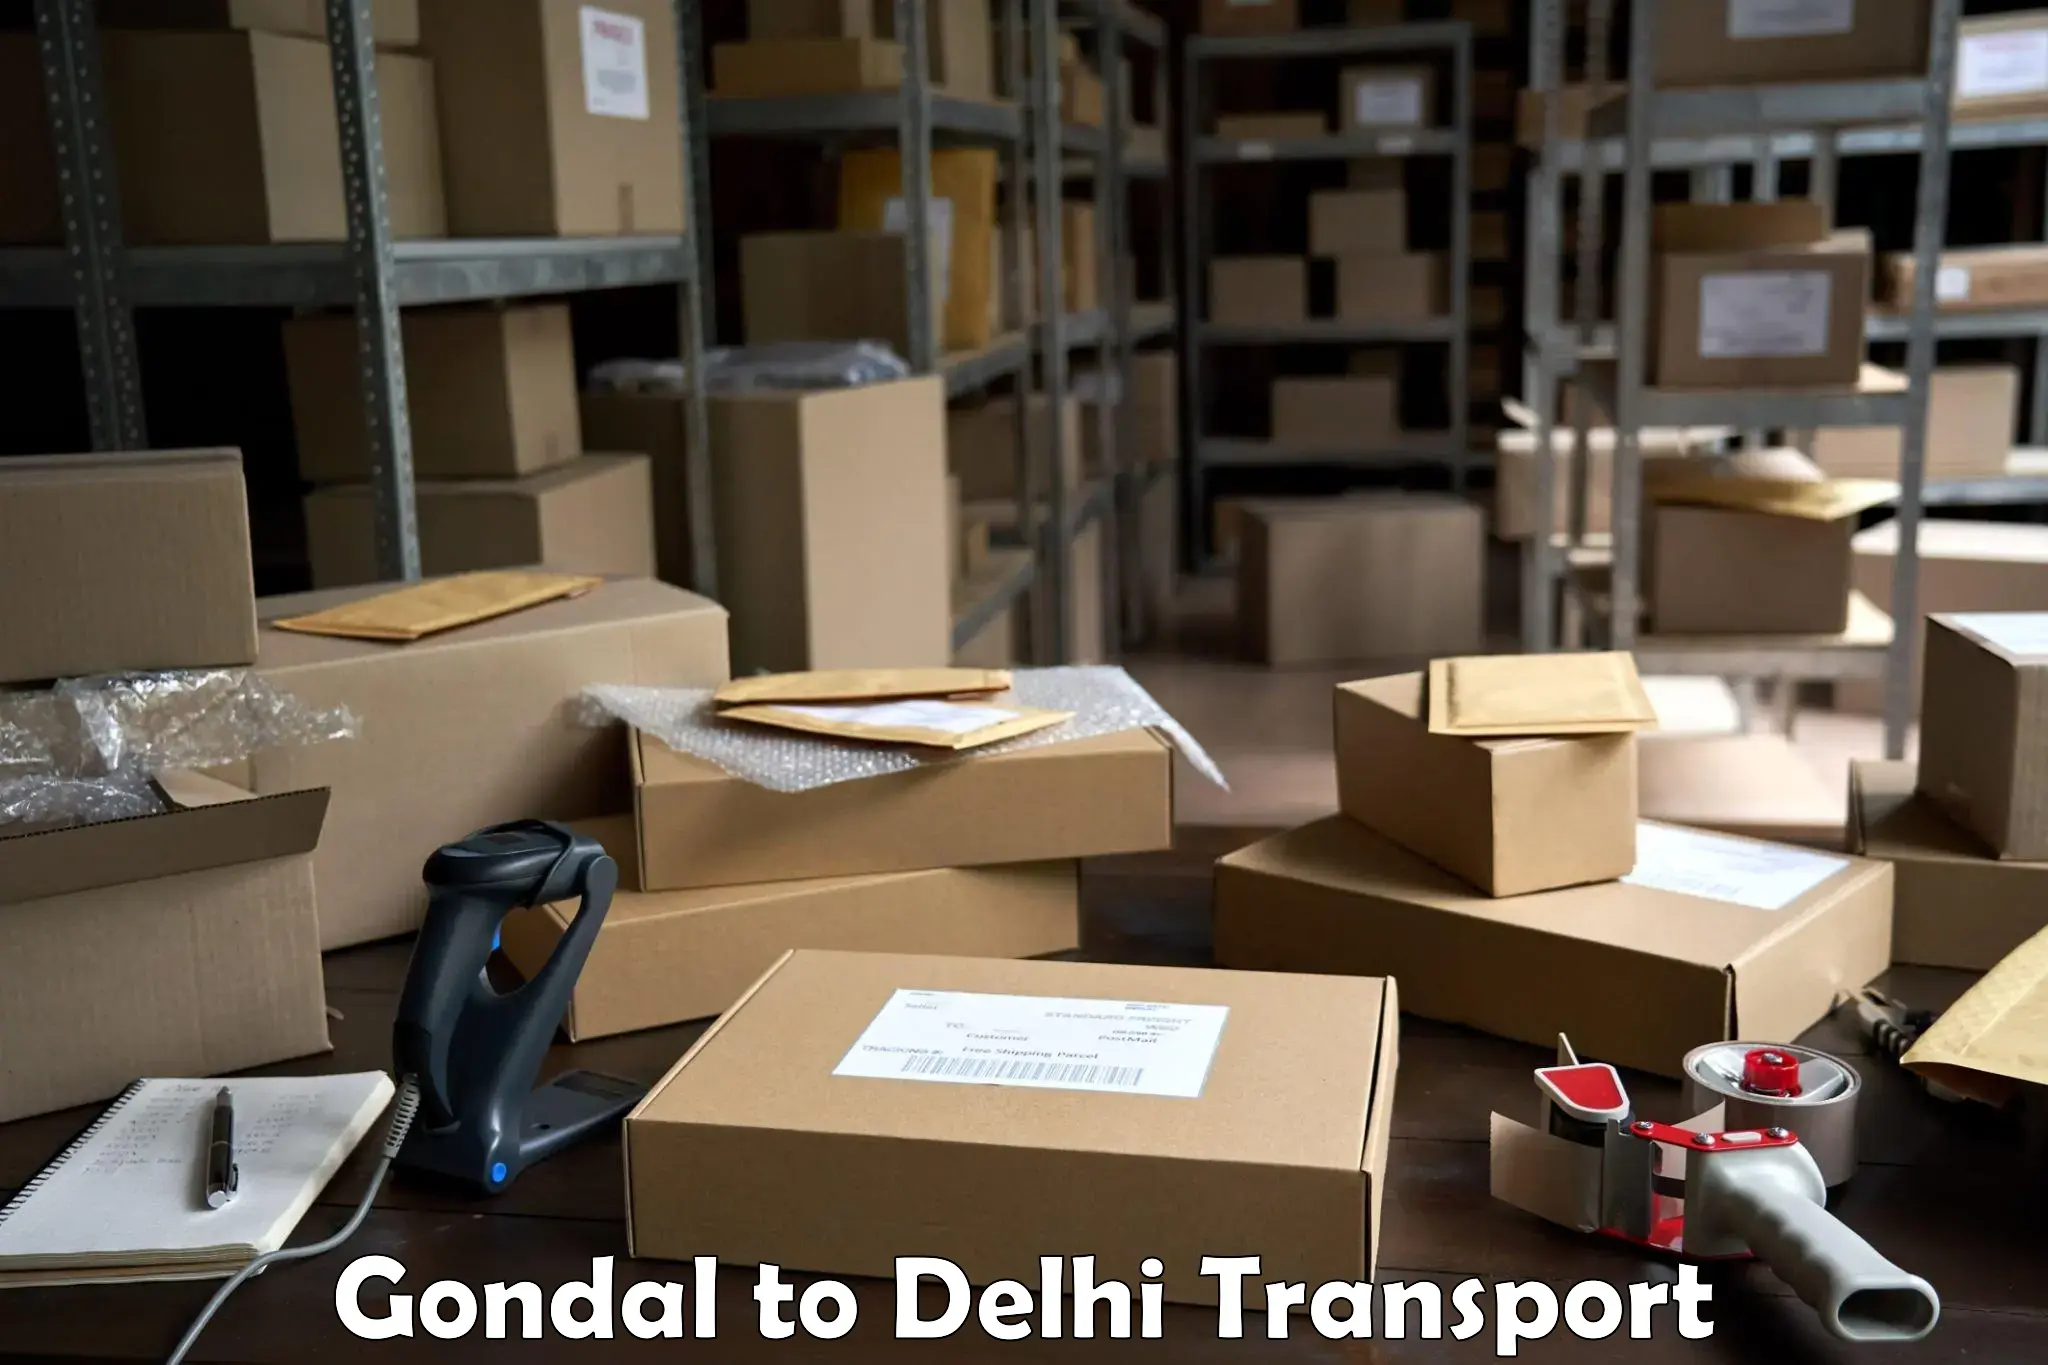 Container transport service Gondal to Delhi